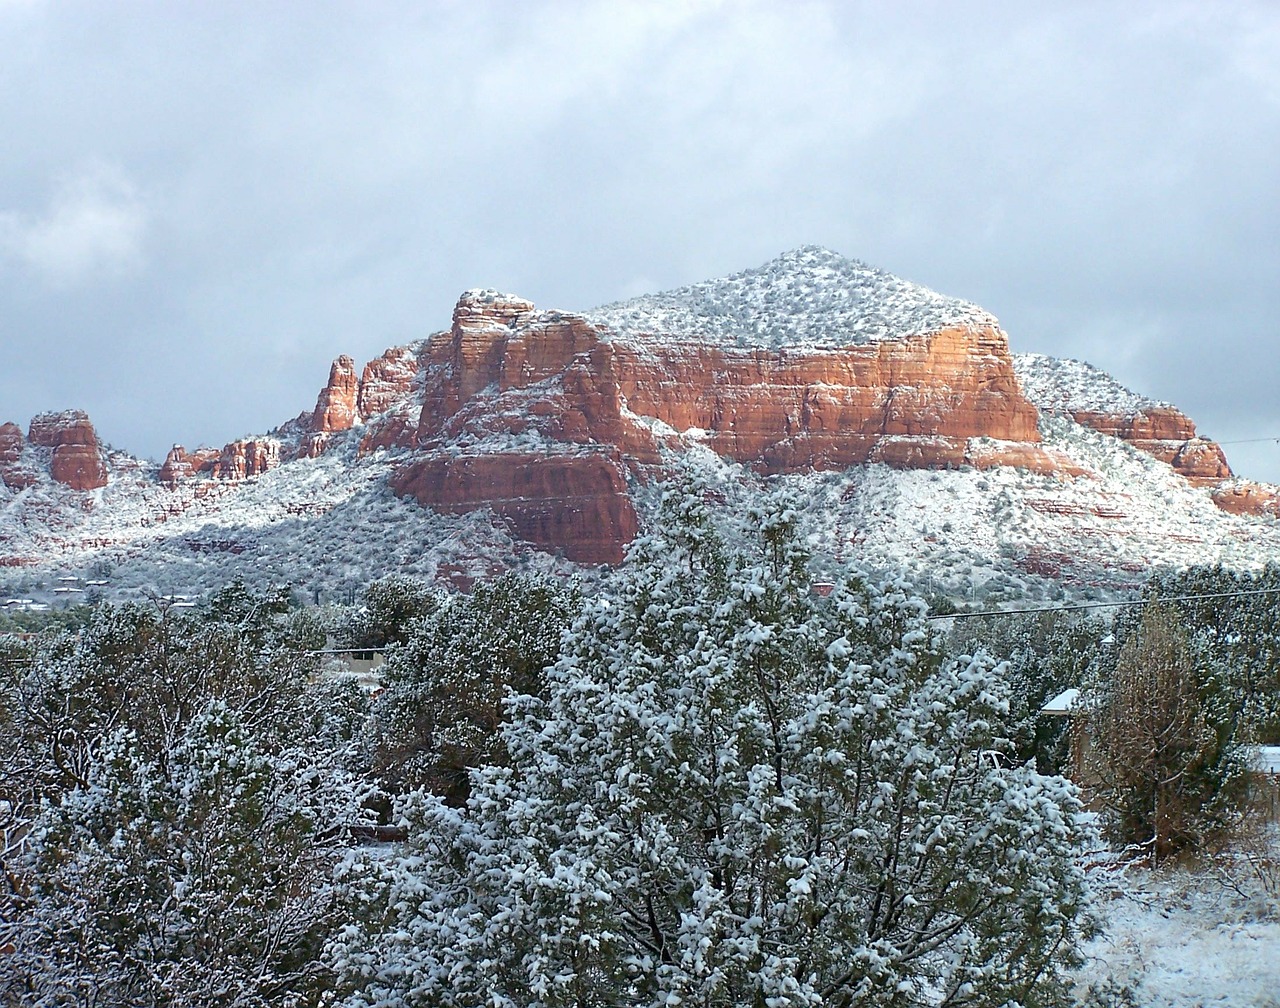 Red rocks covered in snow in Sedona During Winter